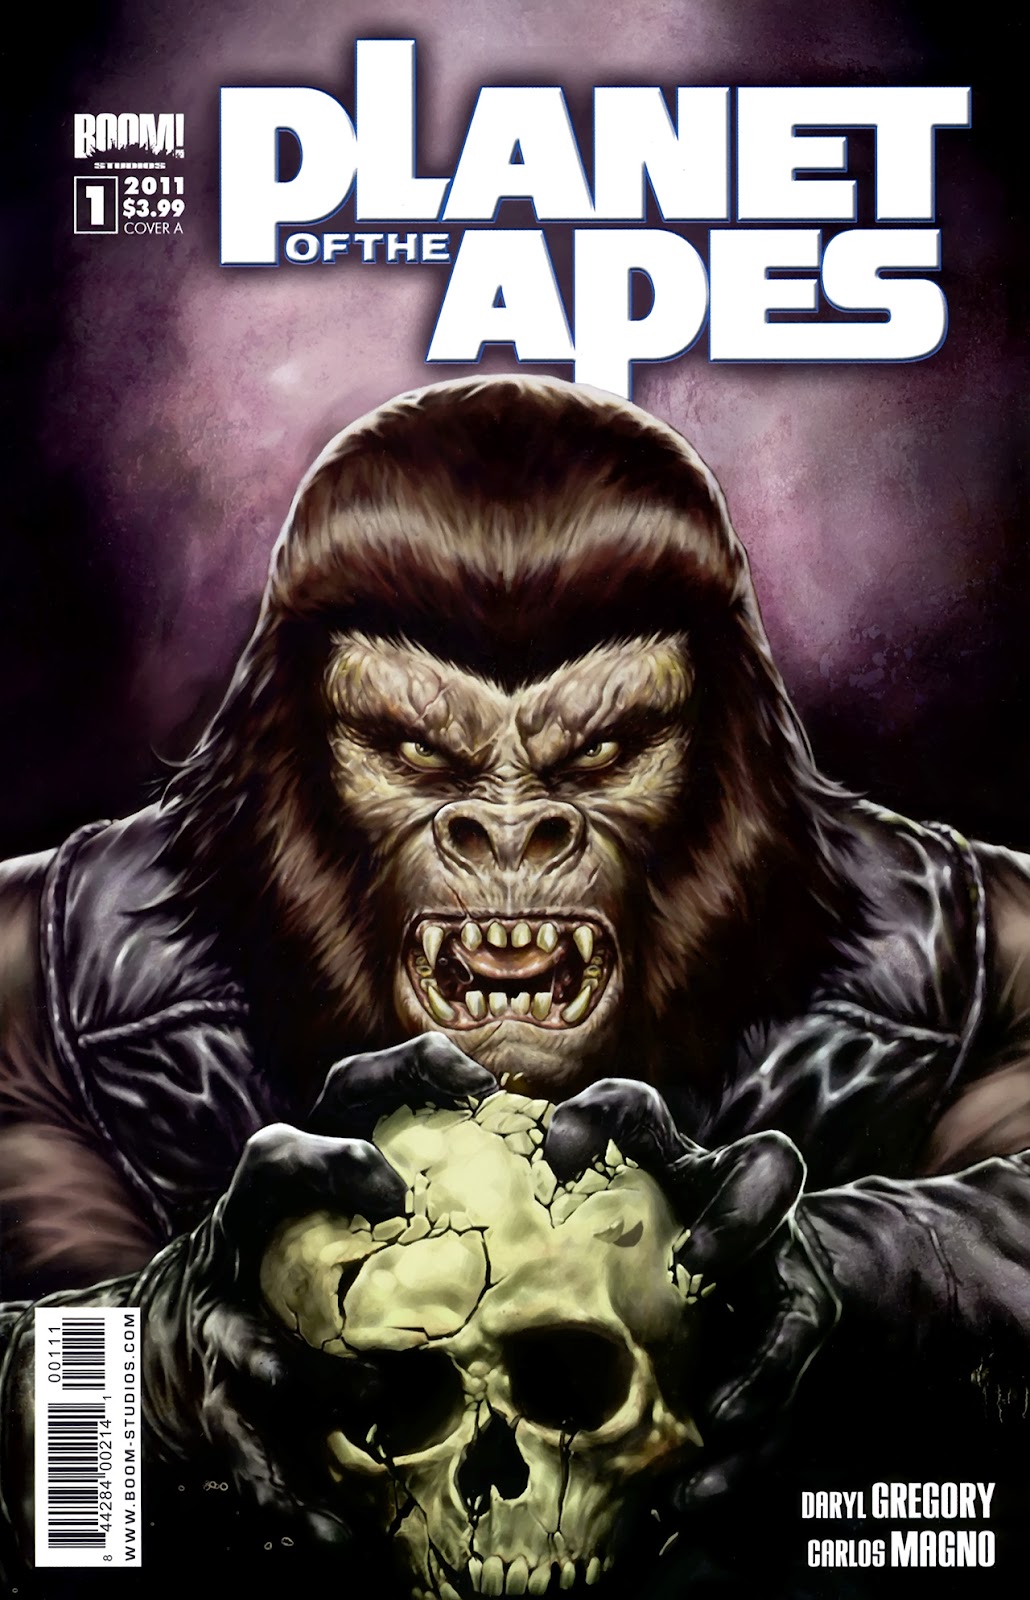 Planet of the apes 2011 free online